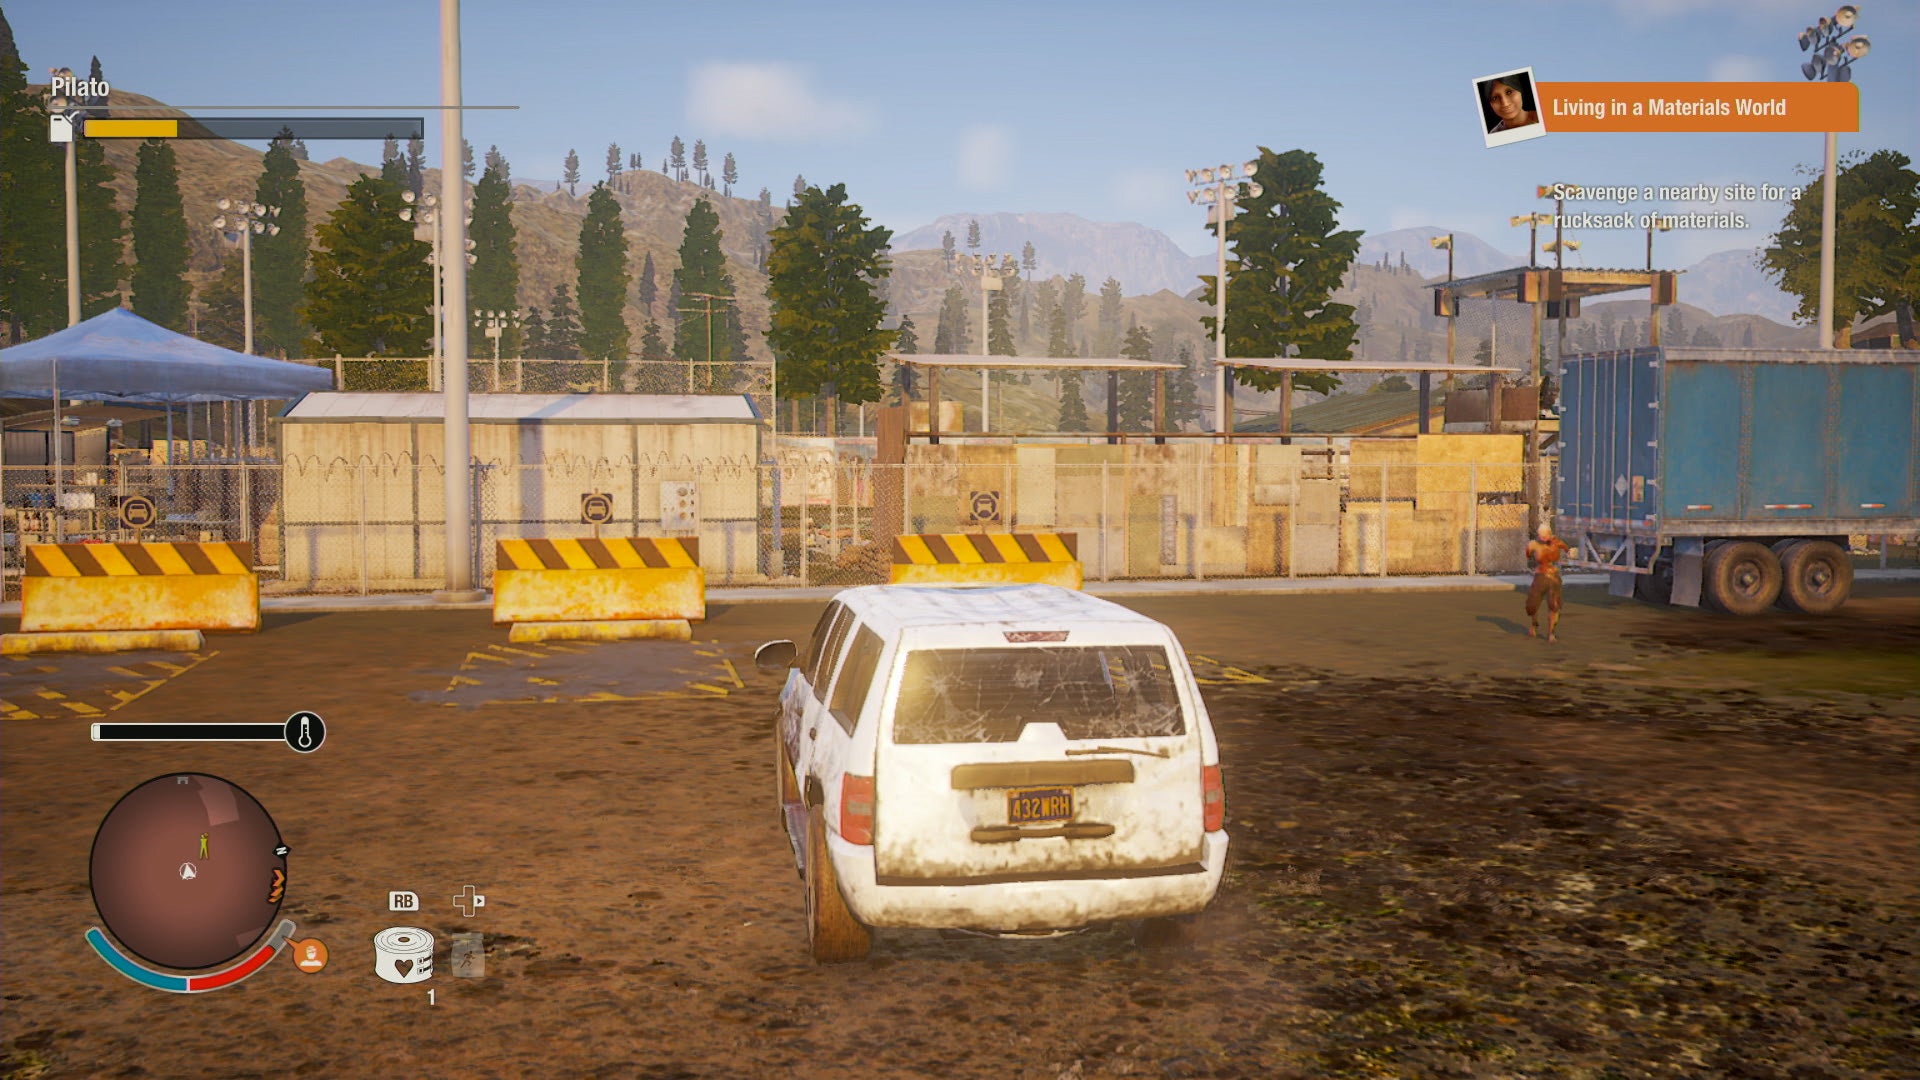 State of decay требования. State of Decay 2 Лесопилка. State of Decay 2 базы. State of Decay 2 база пожарная часть. State of Decay 2: Juggernaut база.